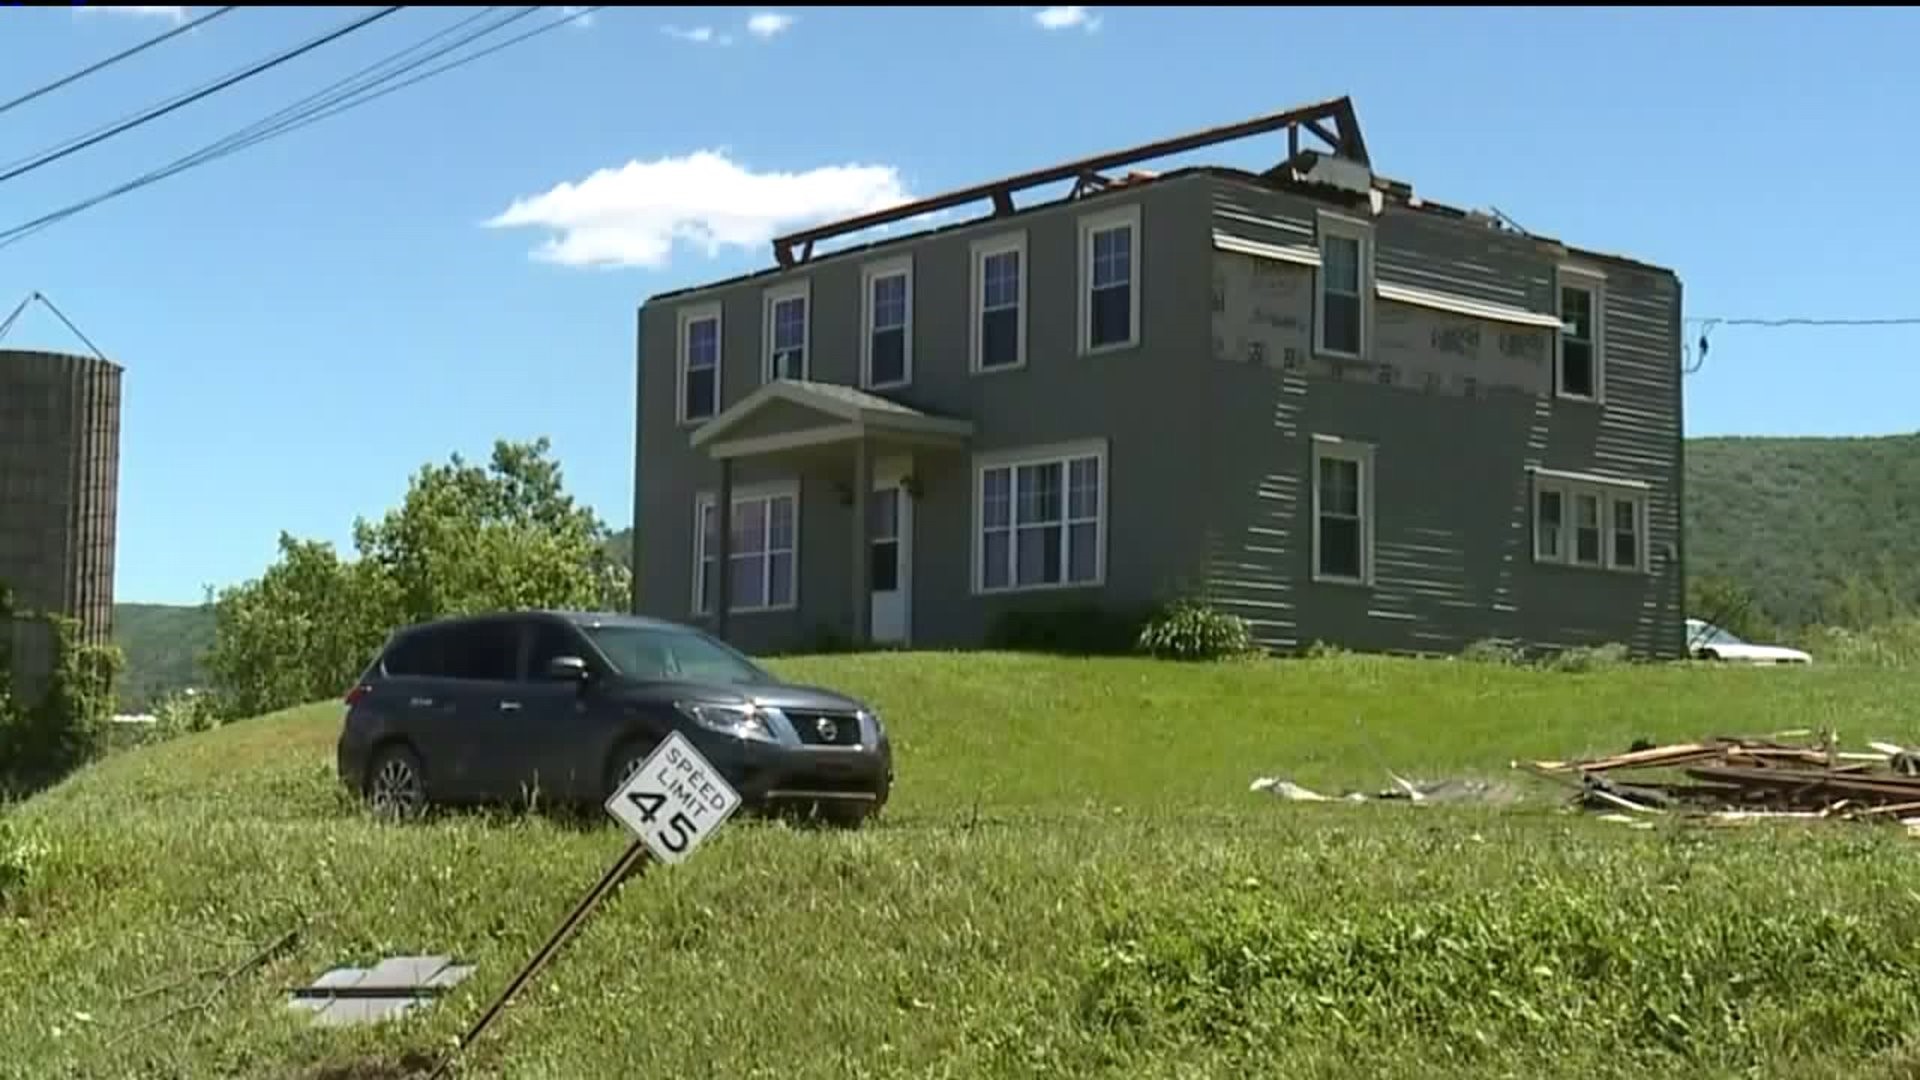 `There were some angels out last night` - Family Thankful after Tornado